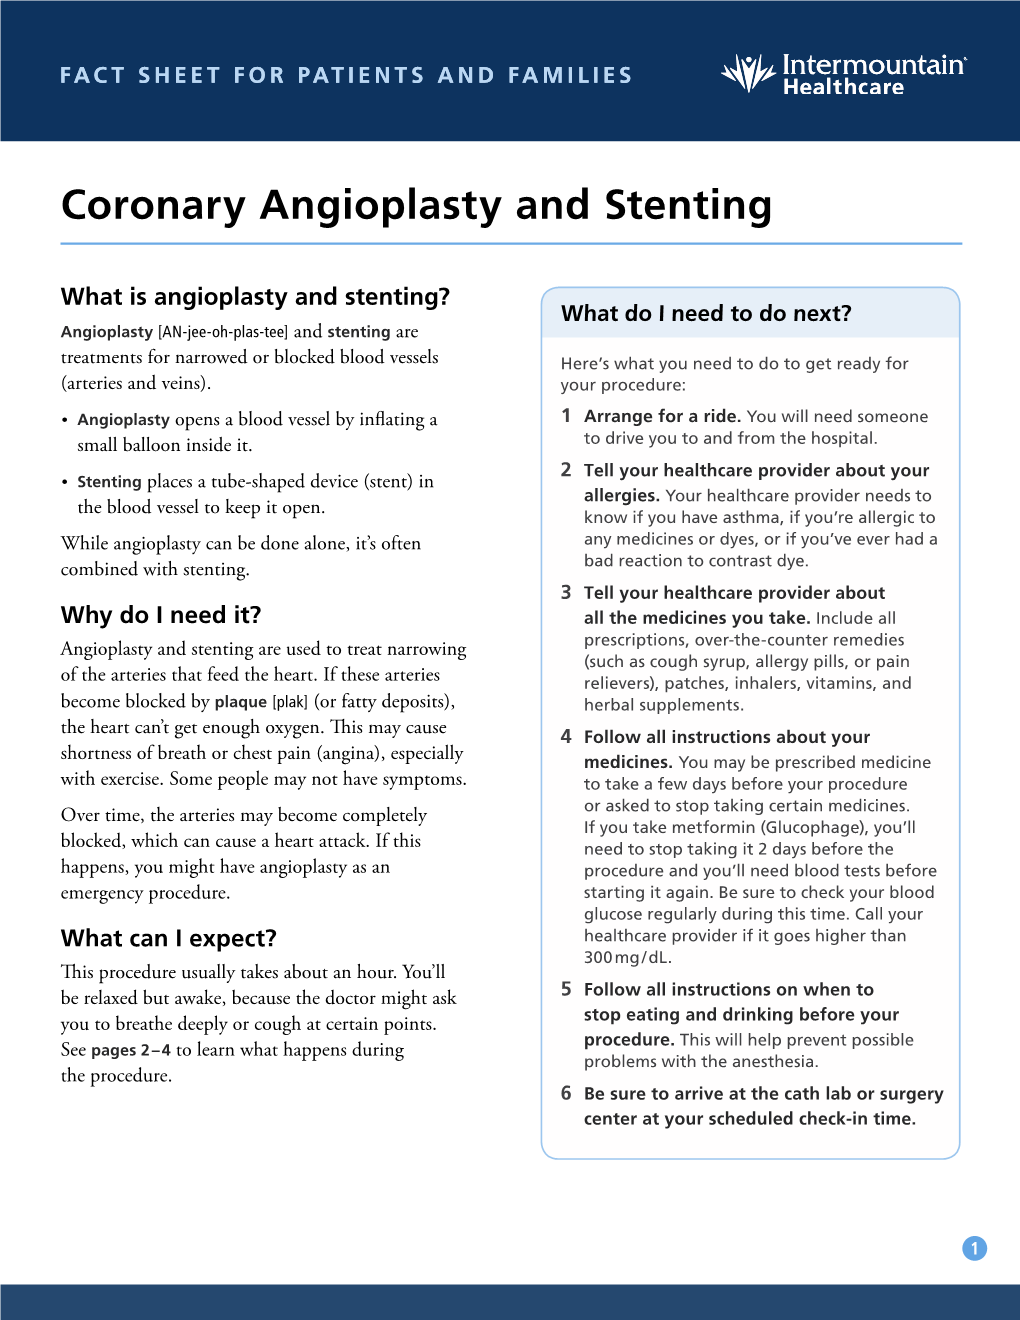 Coronary Angioplasty and Stenting Fact Sheet